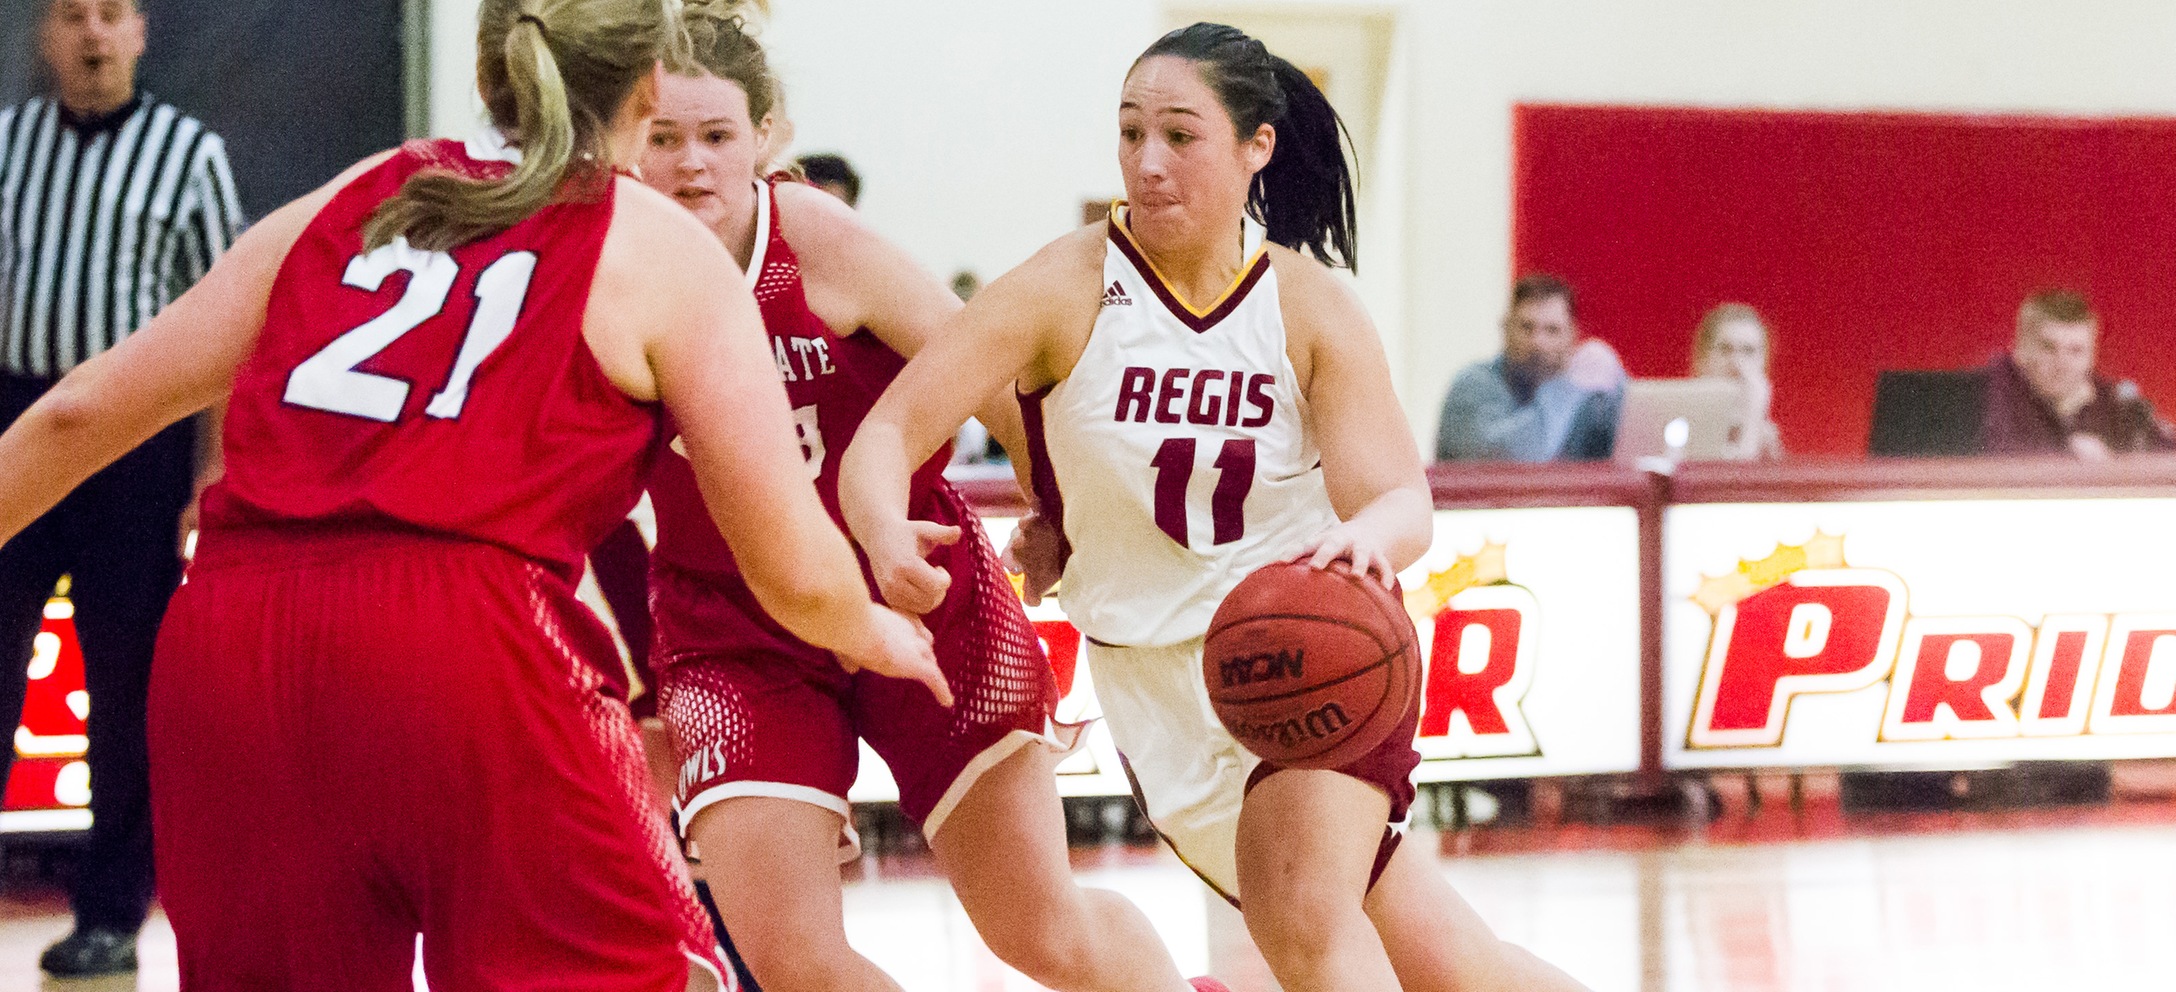 Women's Basketball Tops Lasell, Keeps Pace For Conference Lead